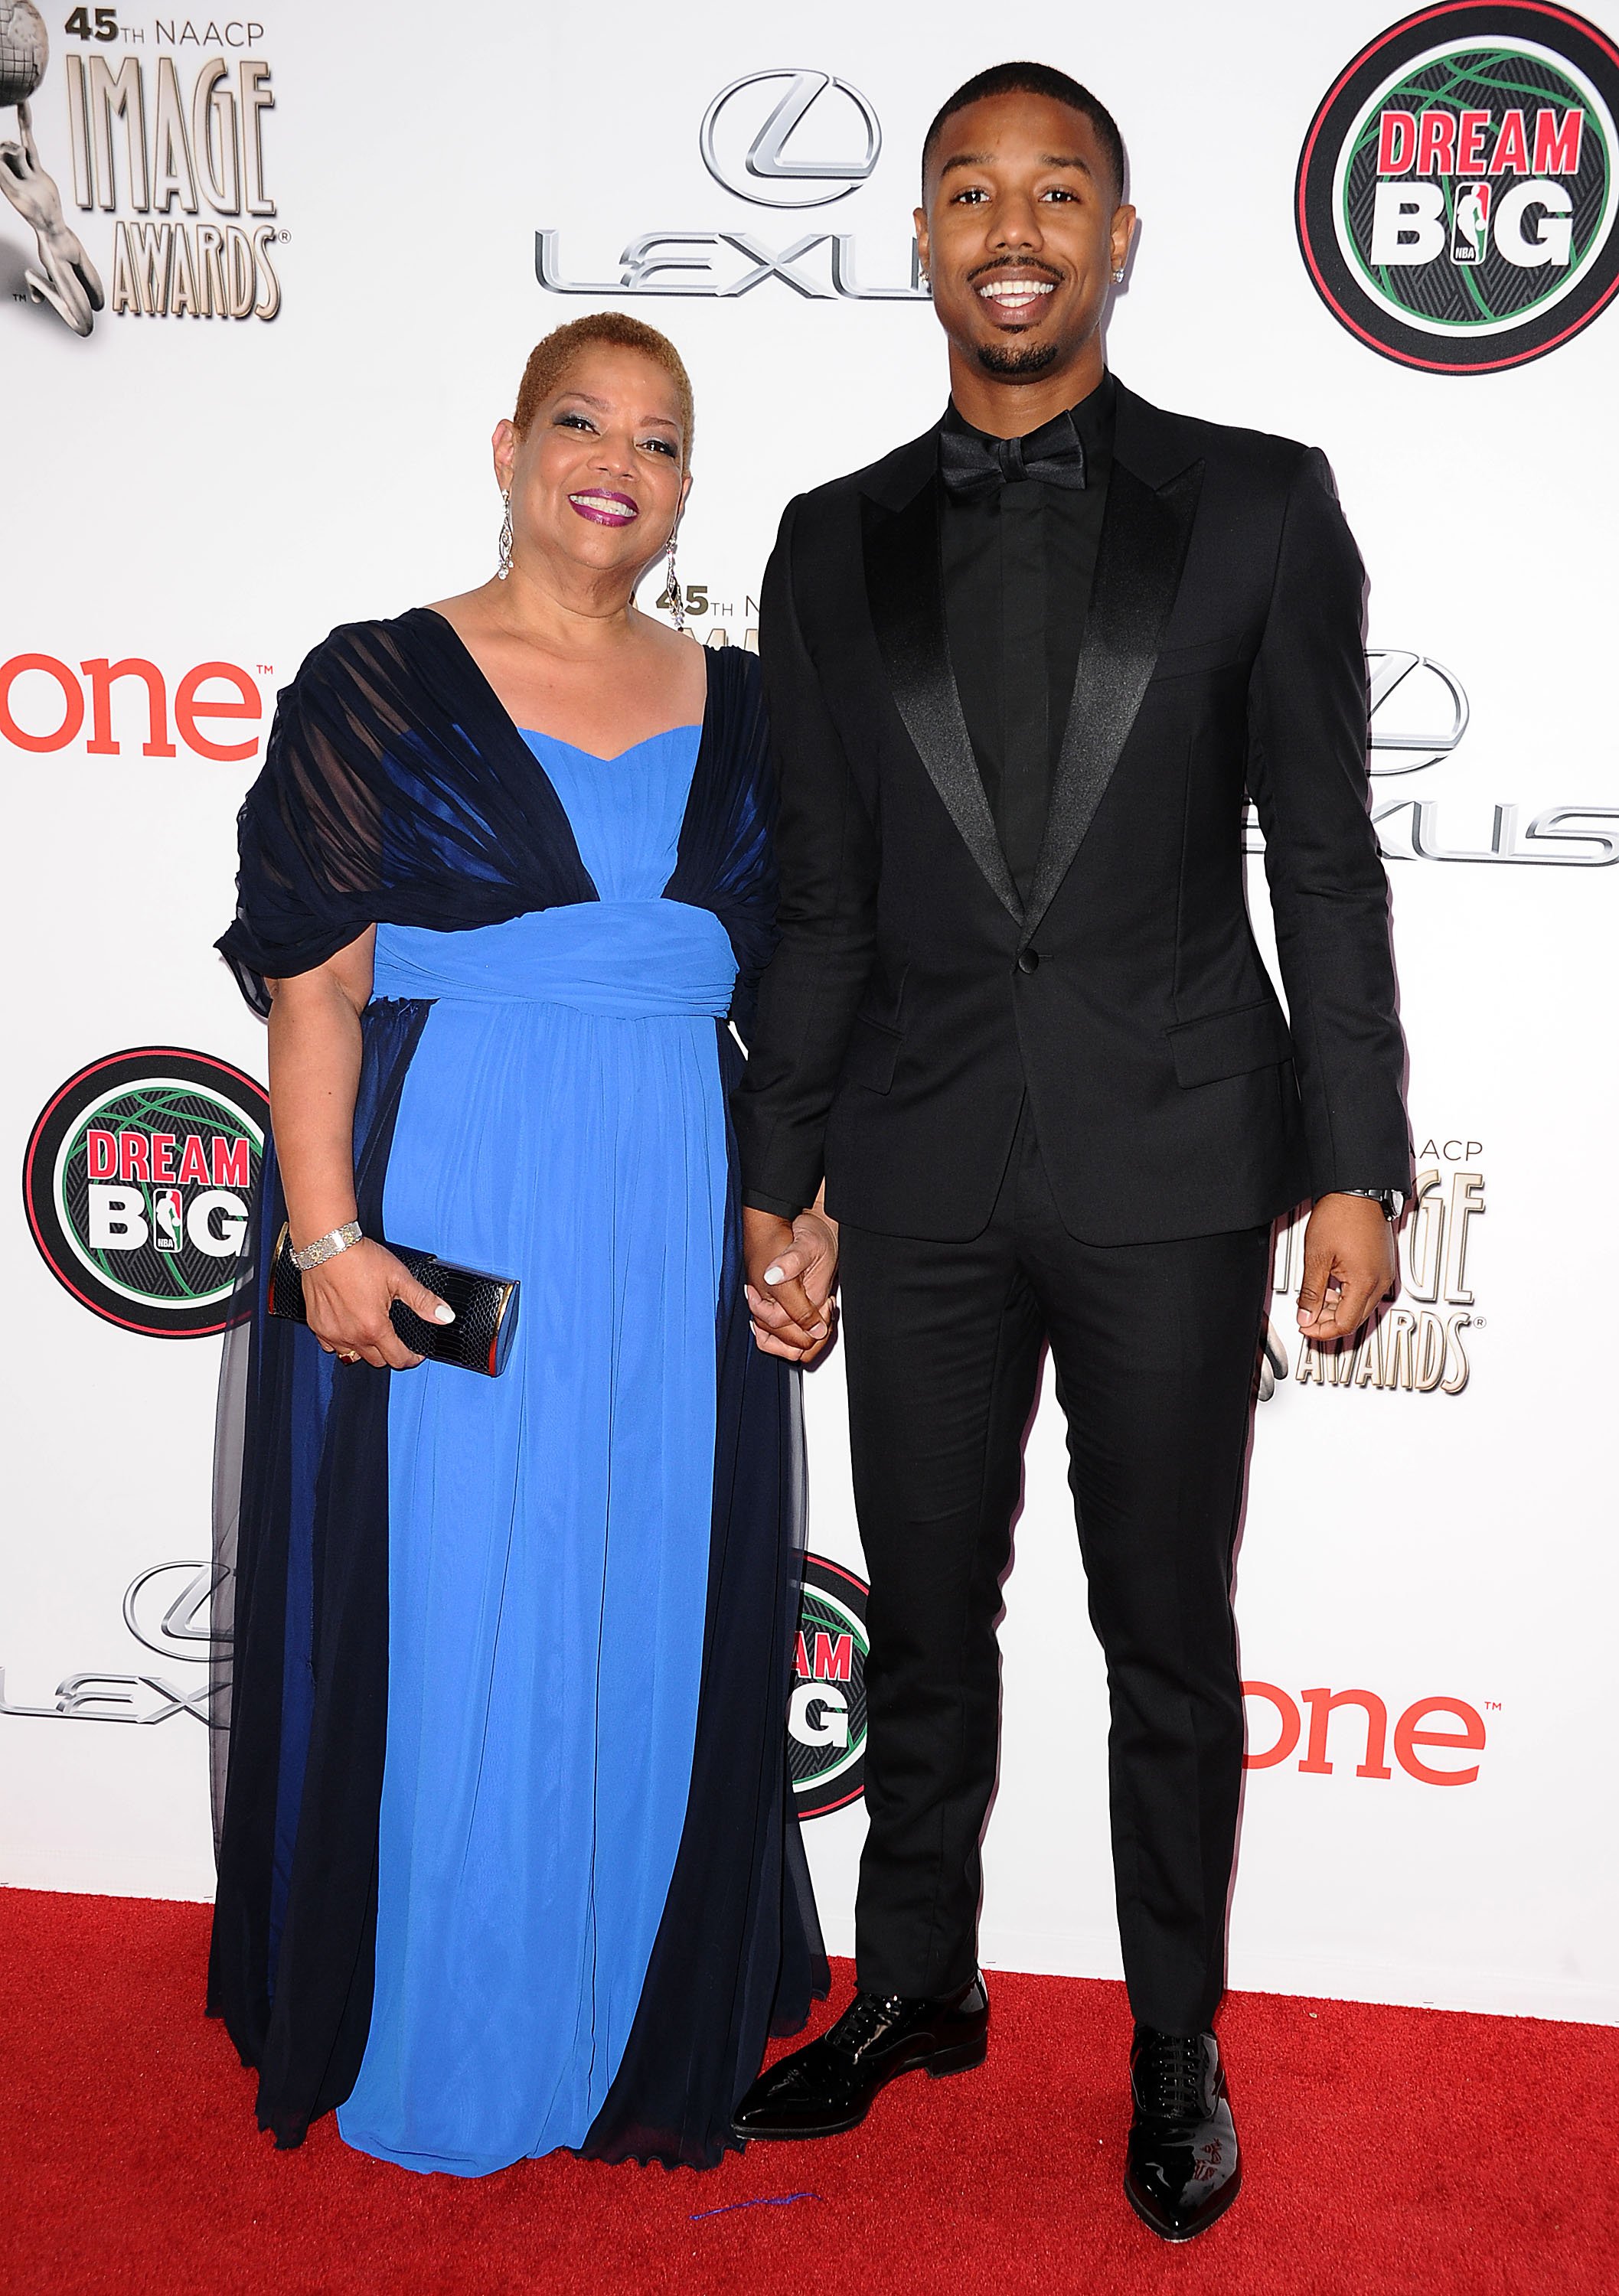 Donna Jordan and her son, actor Michael B. Jordan attend the 45th NAACP Image Awards at Pasadena Civic Auditorium on February 22, 2014 in Pasadena, California. | Source: Getty Images